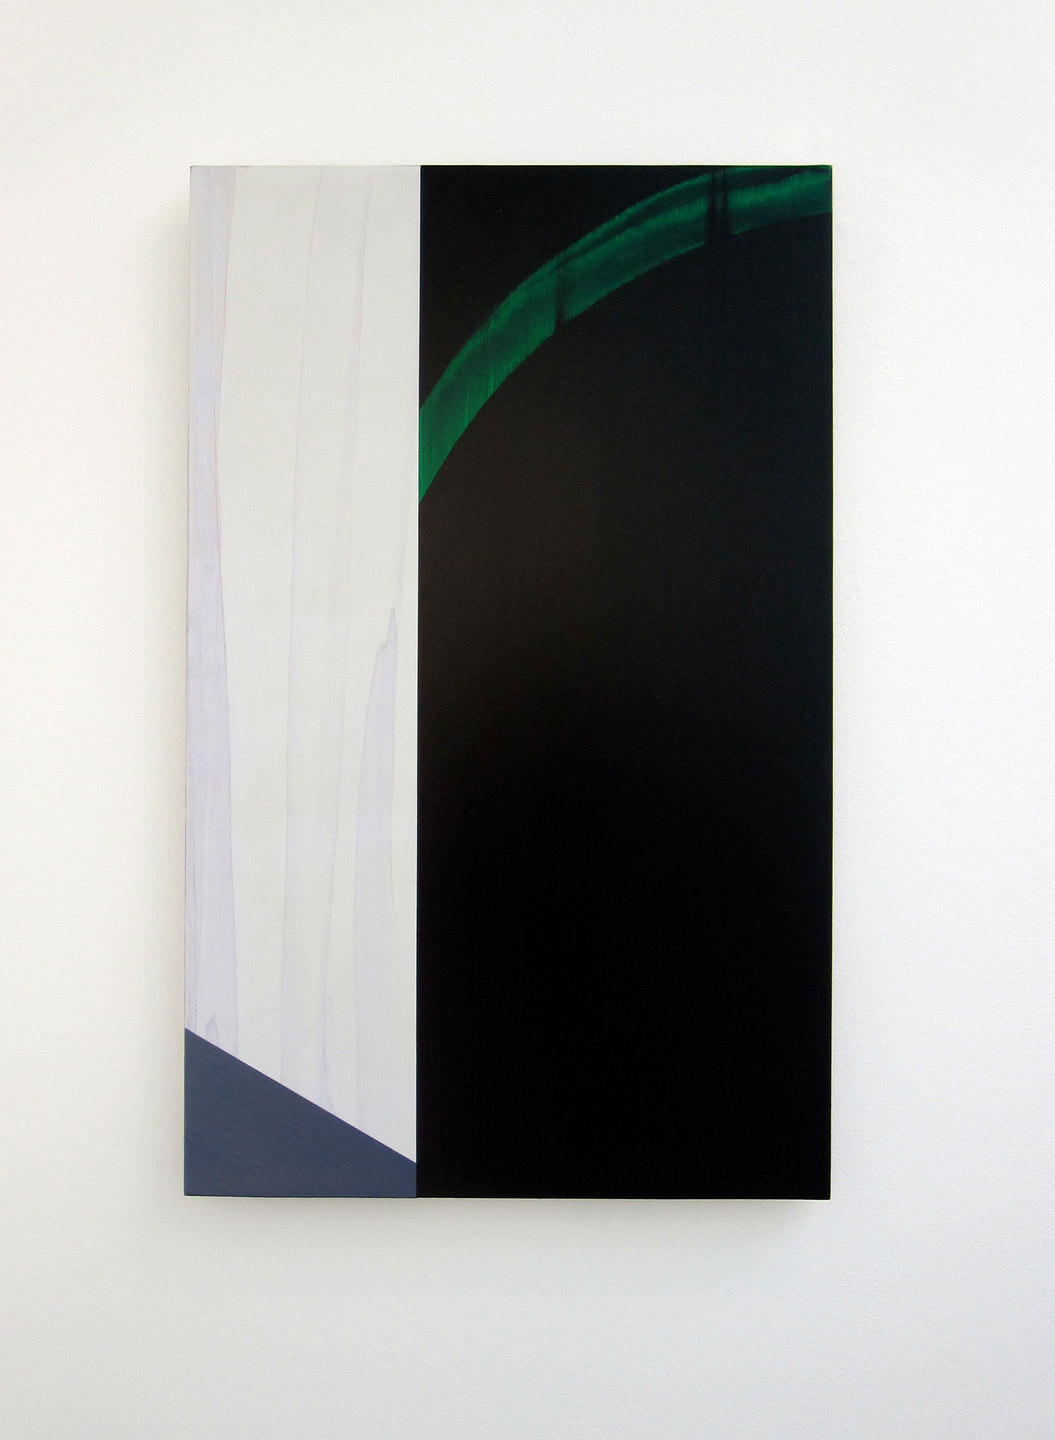 Andy Jackson, The Event, 2010, Acrylic and Metallic Acrylic on Board, (h.280mm x w.170mm), Cell Project Space